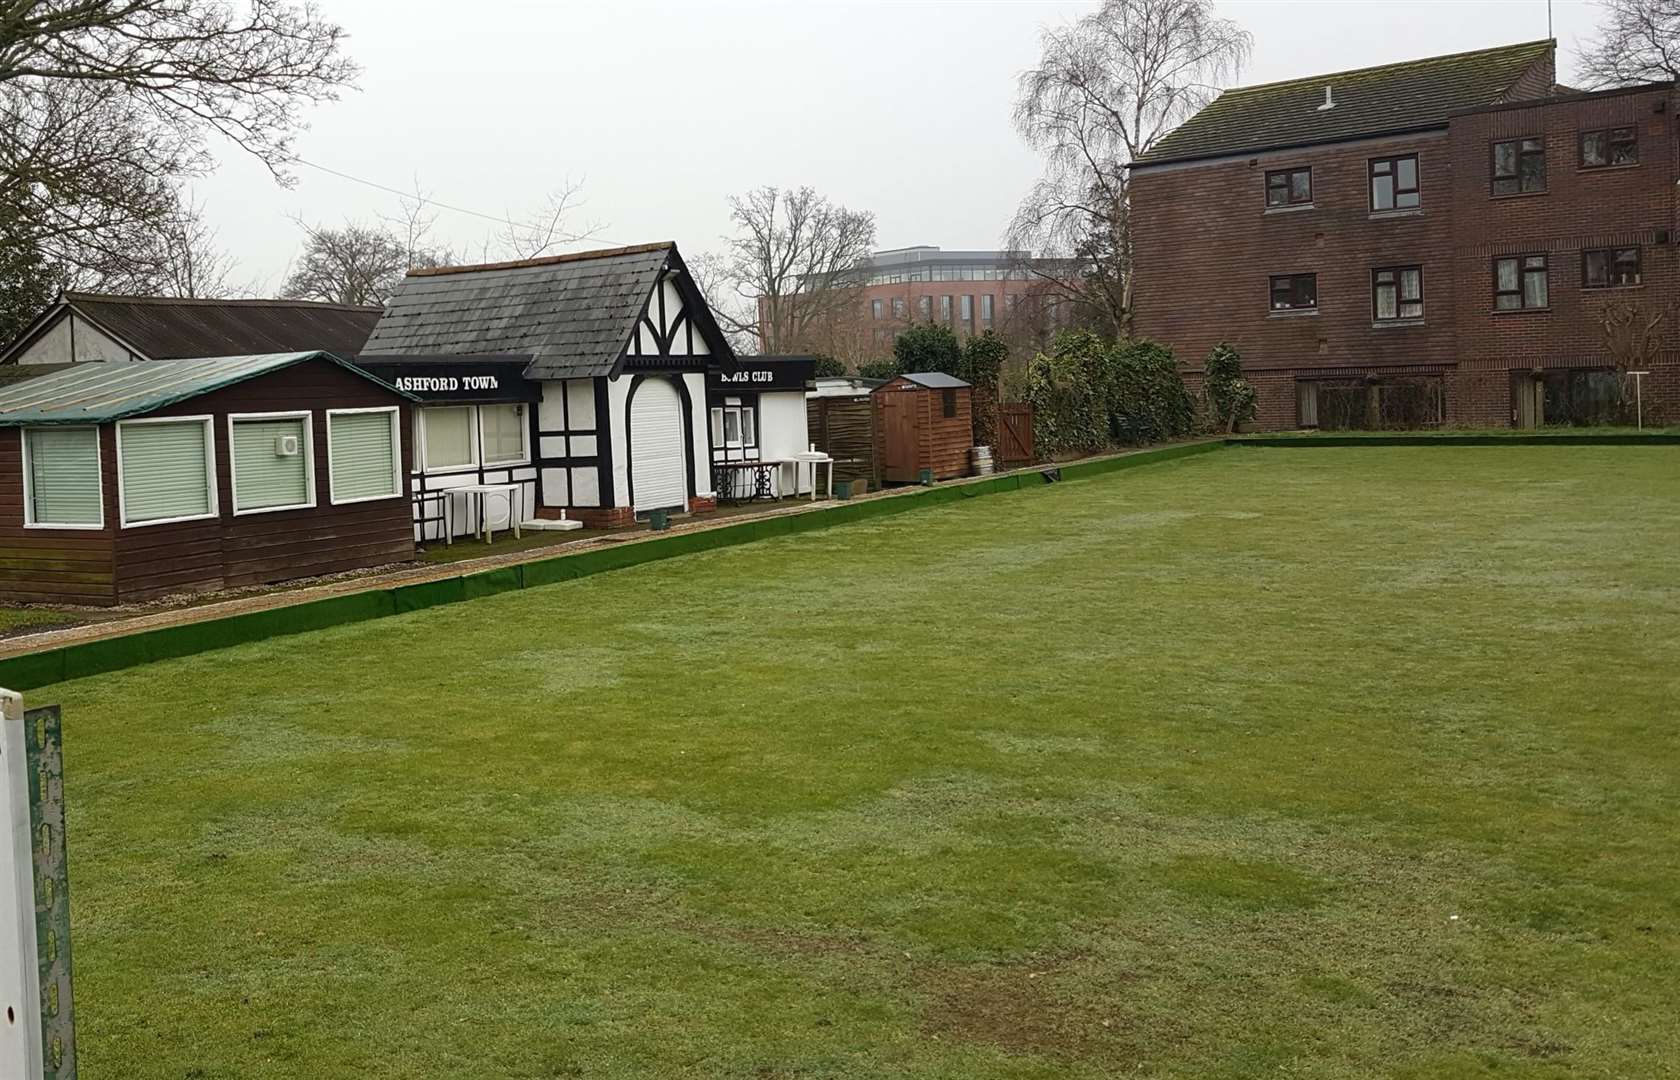 The planning application provides a new home for Ashford Town Bowls Club